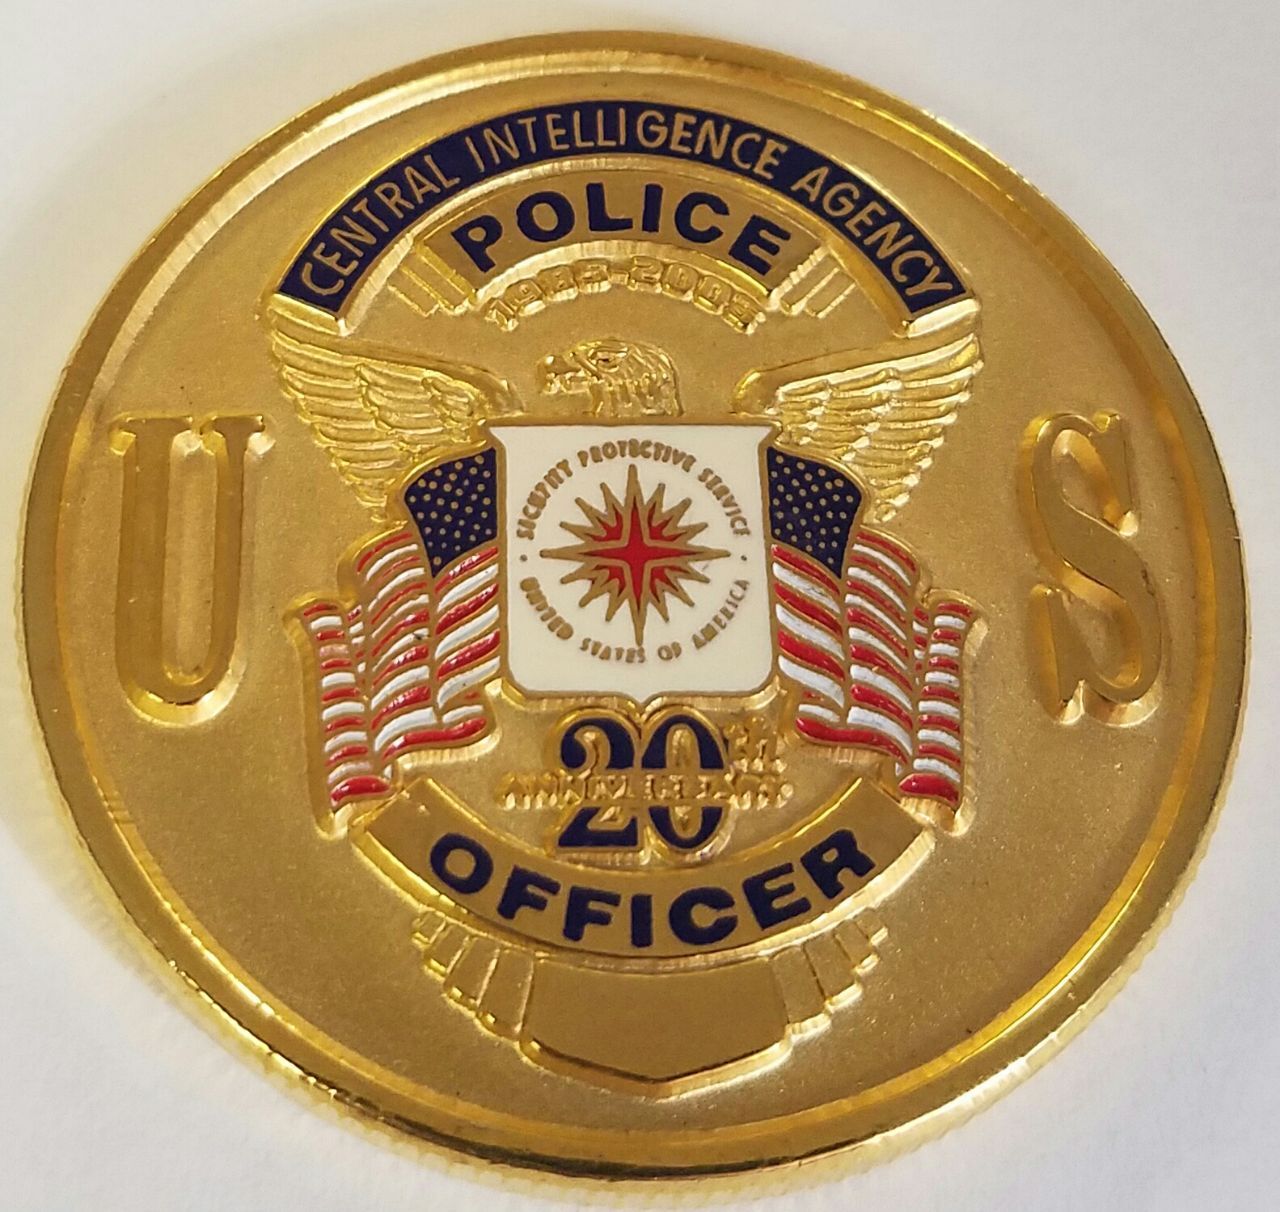 CIA Central Intelligence Agency Security Protective Service Police 20th Anniv